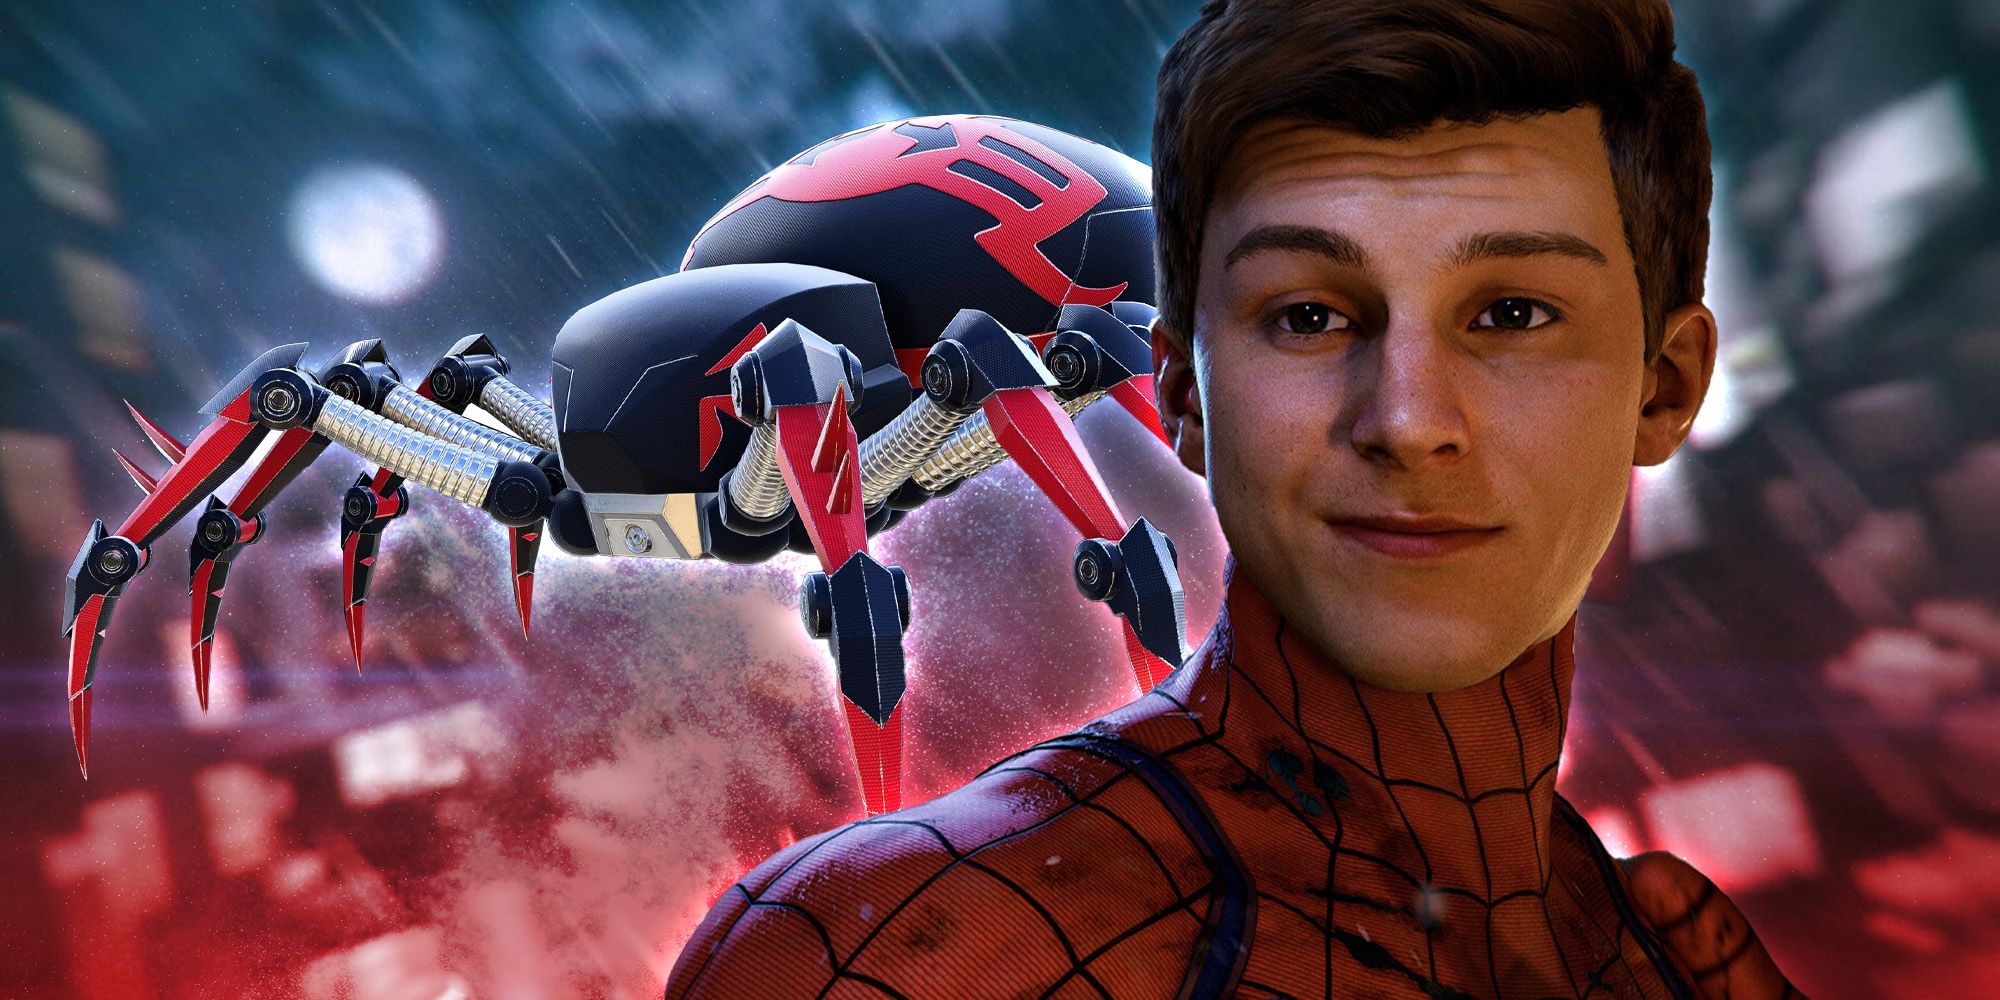 Marvel's Spider-Man 2 Guide - All Secret Suits Locations